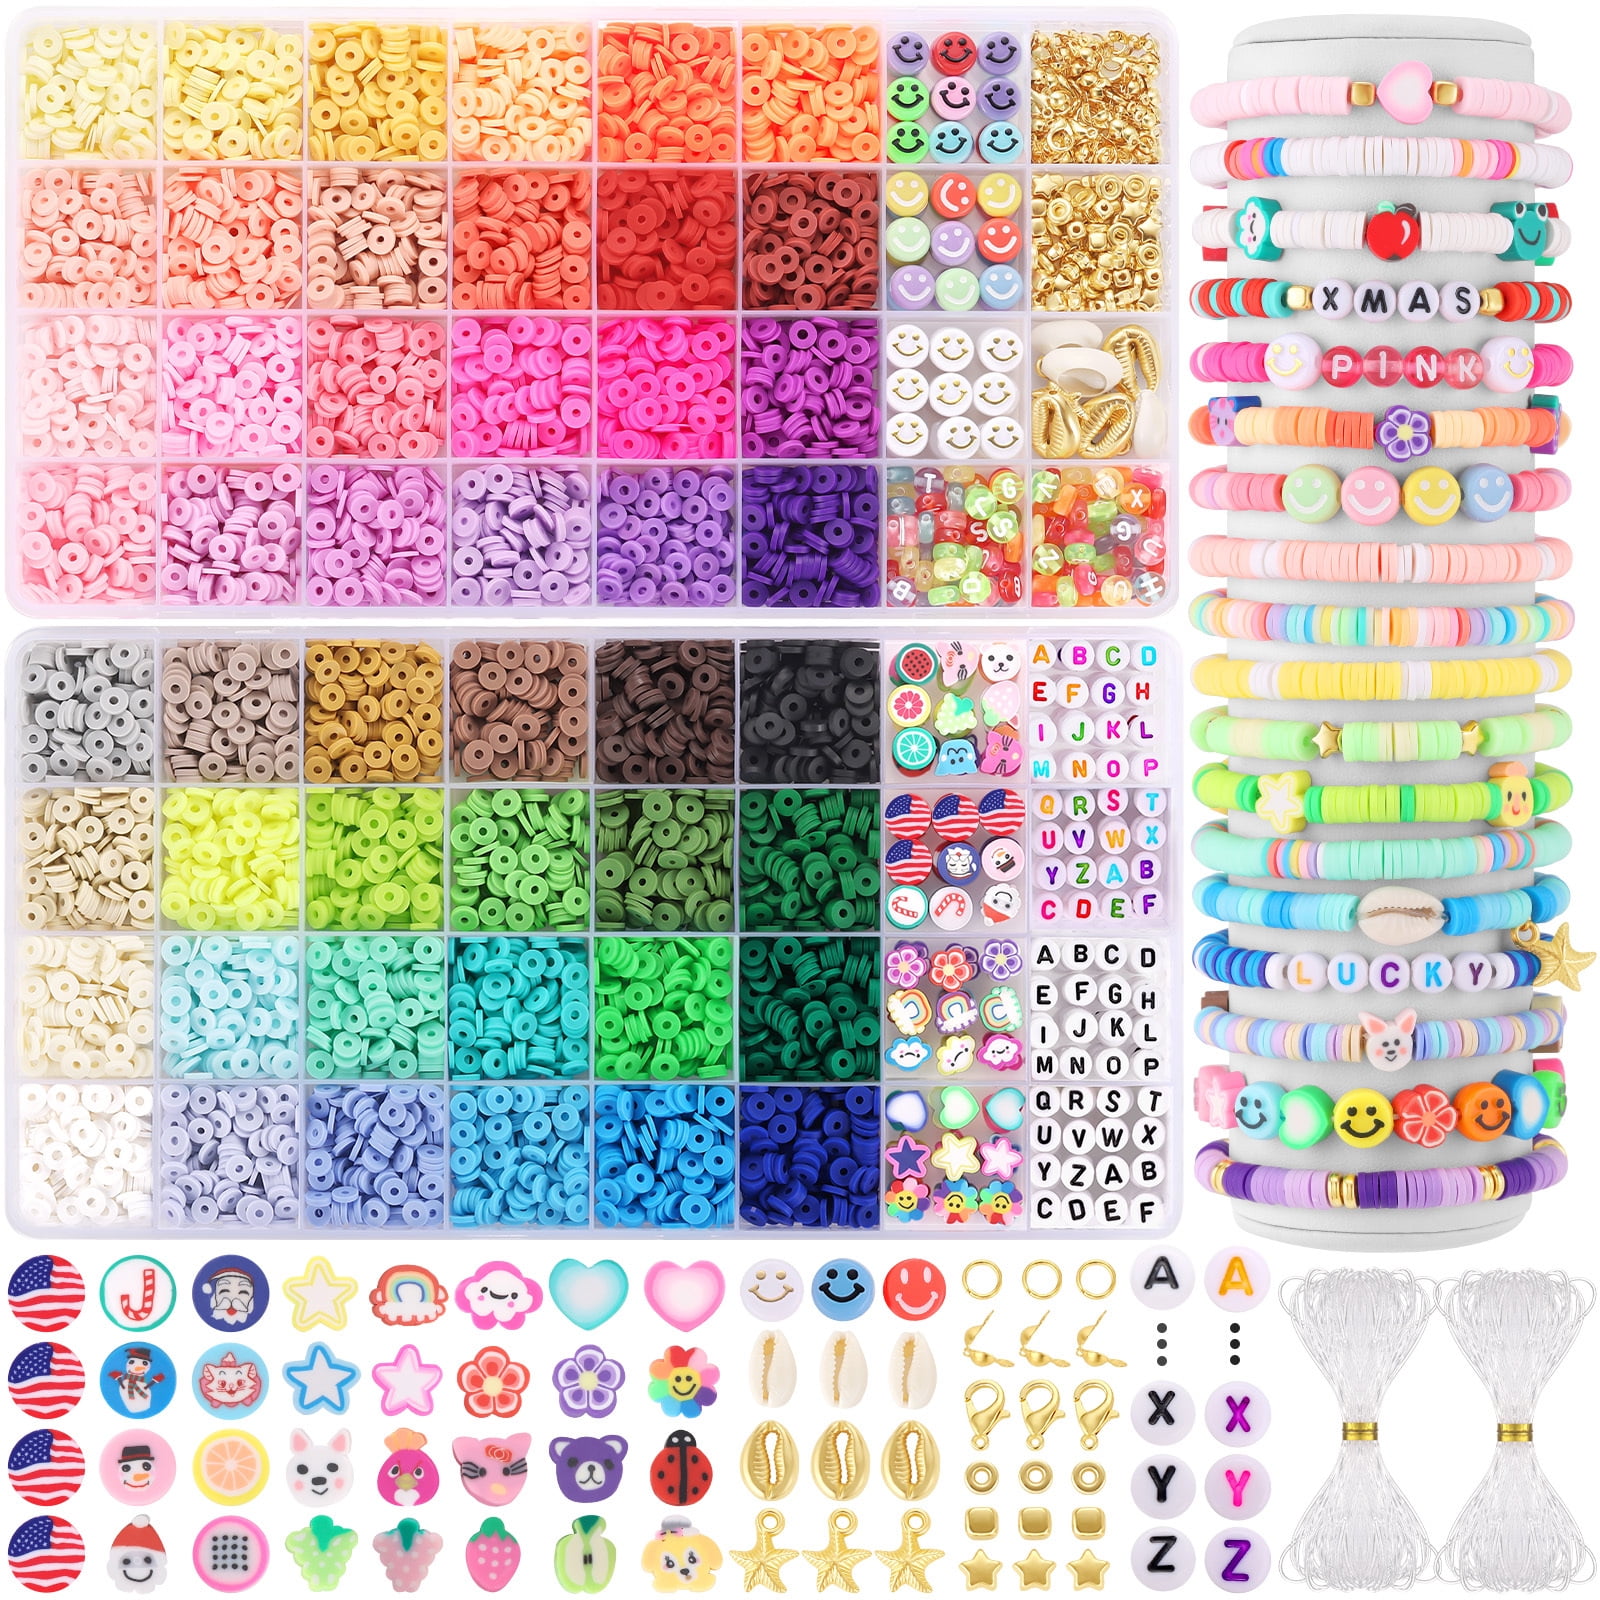 WEUOPG 12570pcs Bracelet Making Kit for Girls, Clay Beads for Bracelets  Making, 48 Colors 3 Boxes Jewelry Making Kit, Letter Beads with Charm and